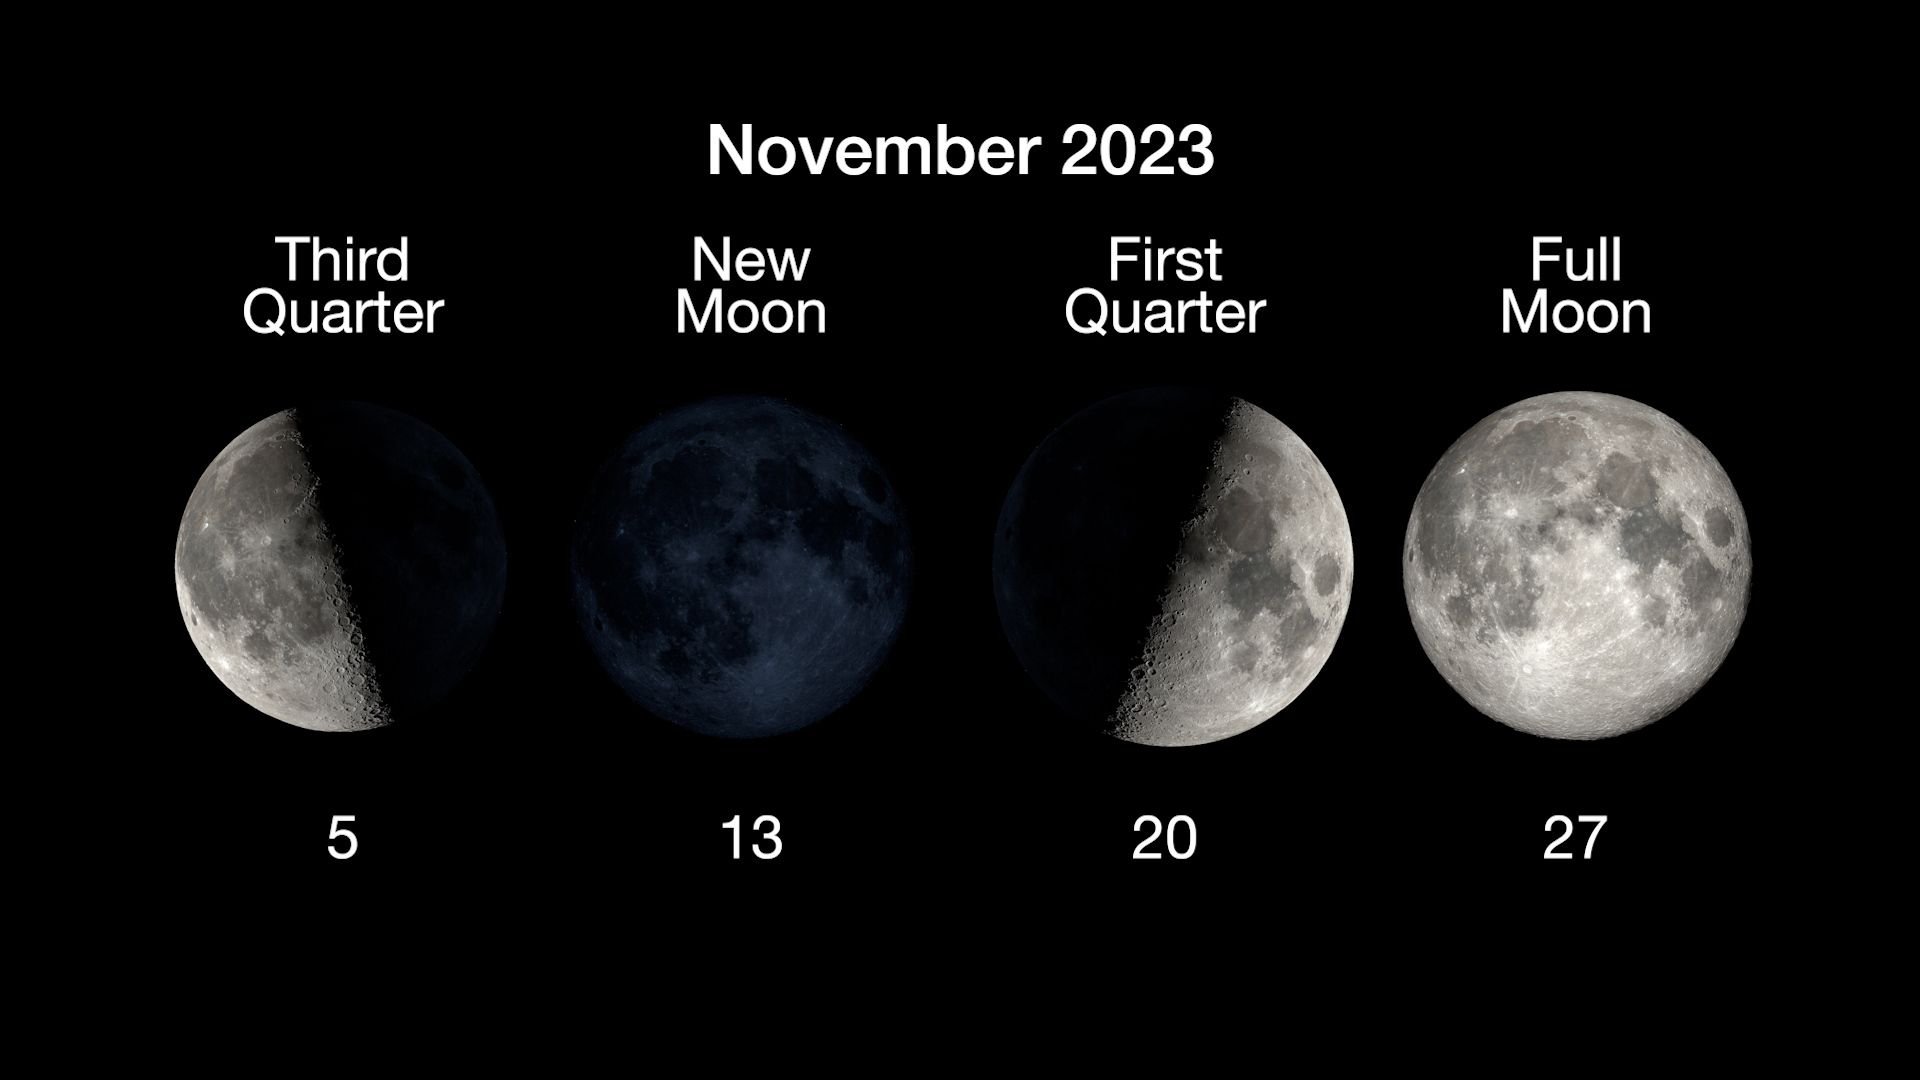 The main phases of the Moon are illustrated in a horizontal row, with the third quarter moon on November 5, new moon on November 13, first quarter on November 20, and full moon on November 27.